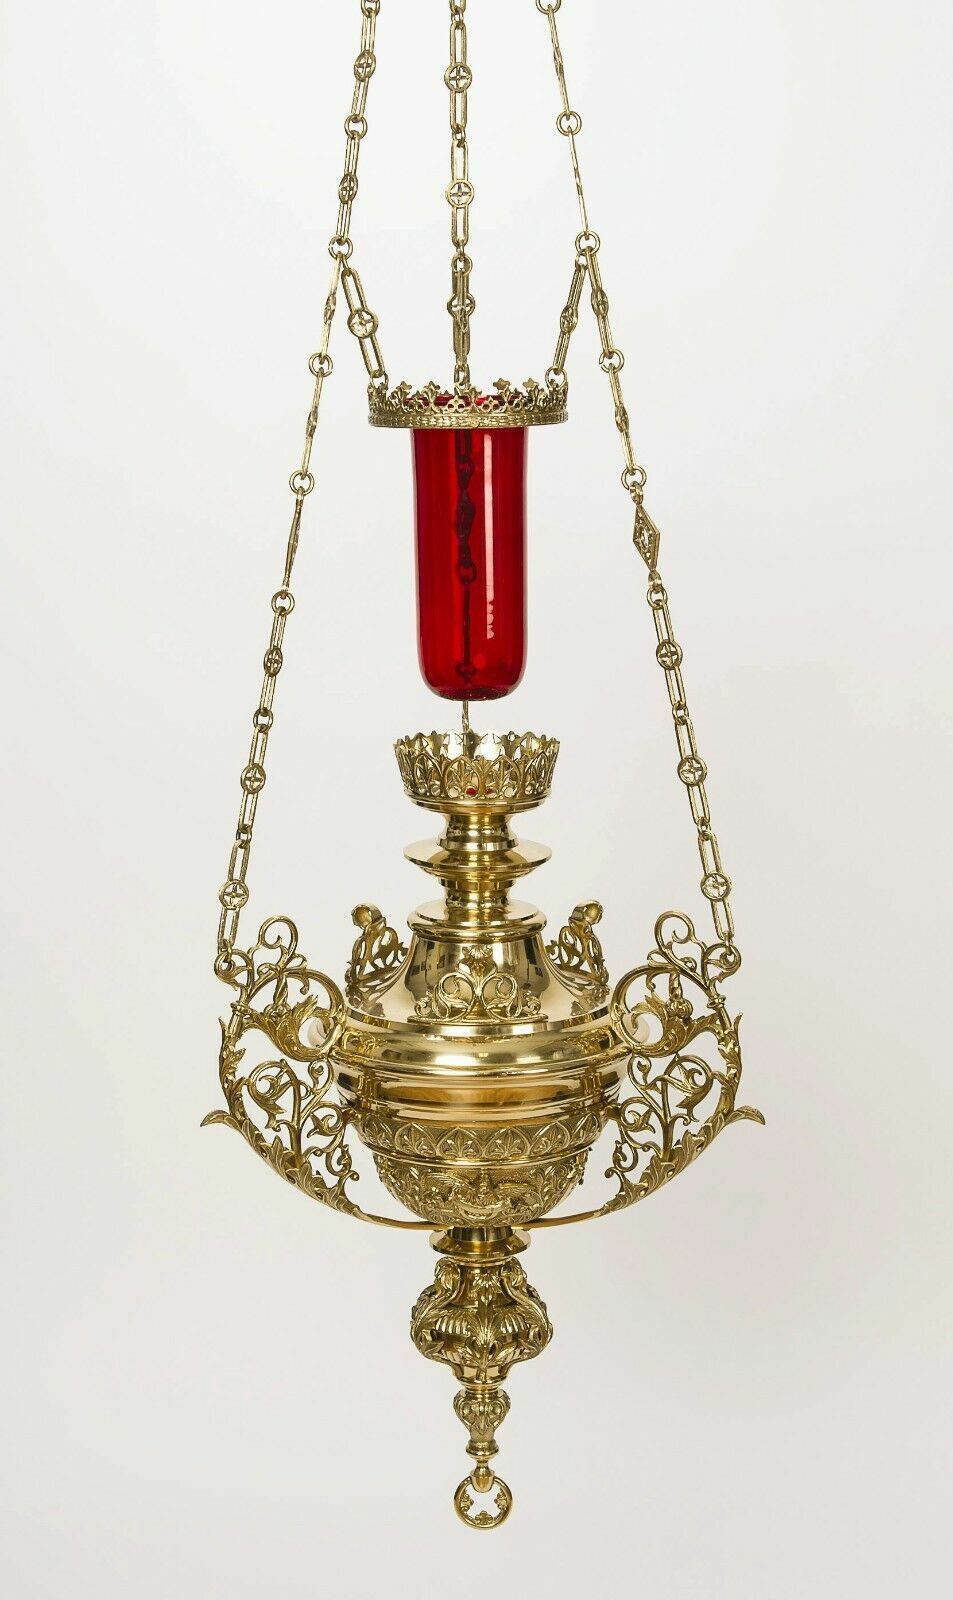 LARGE BRASS HANGING CATHEDRAL SIZE CHURCH SANCTUARY LAMP WITH RED GLOBE - 199